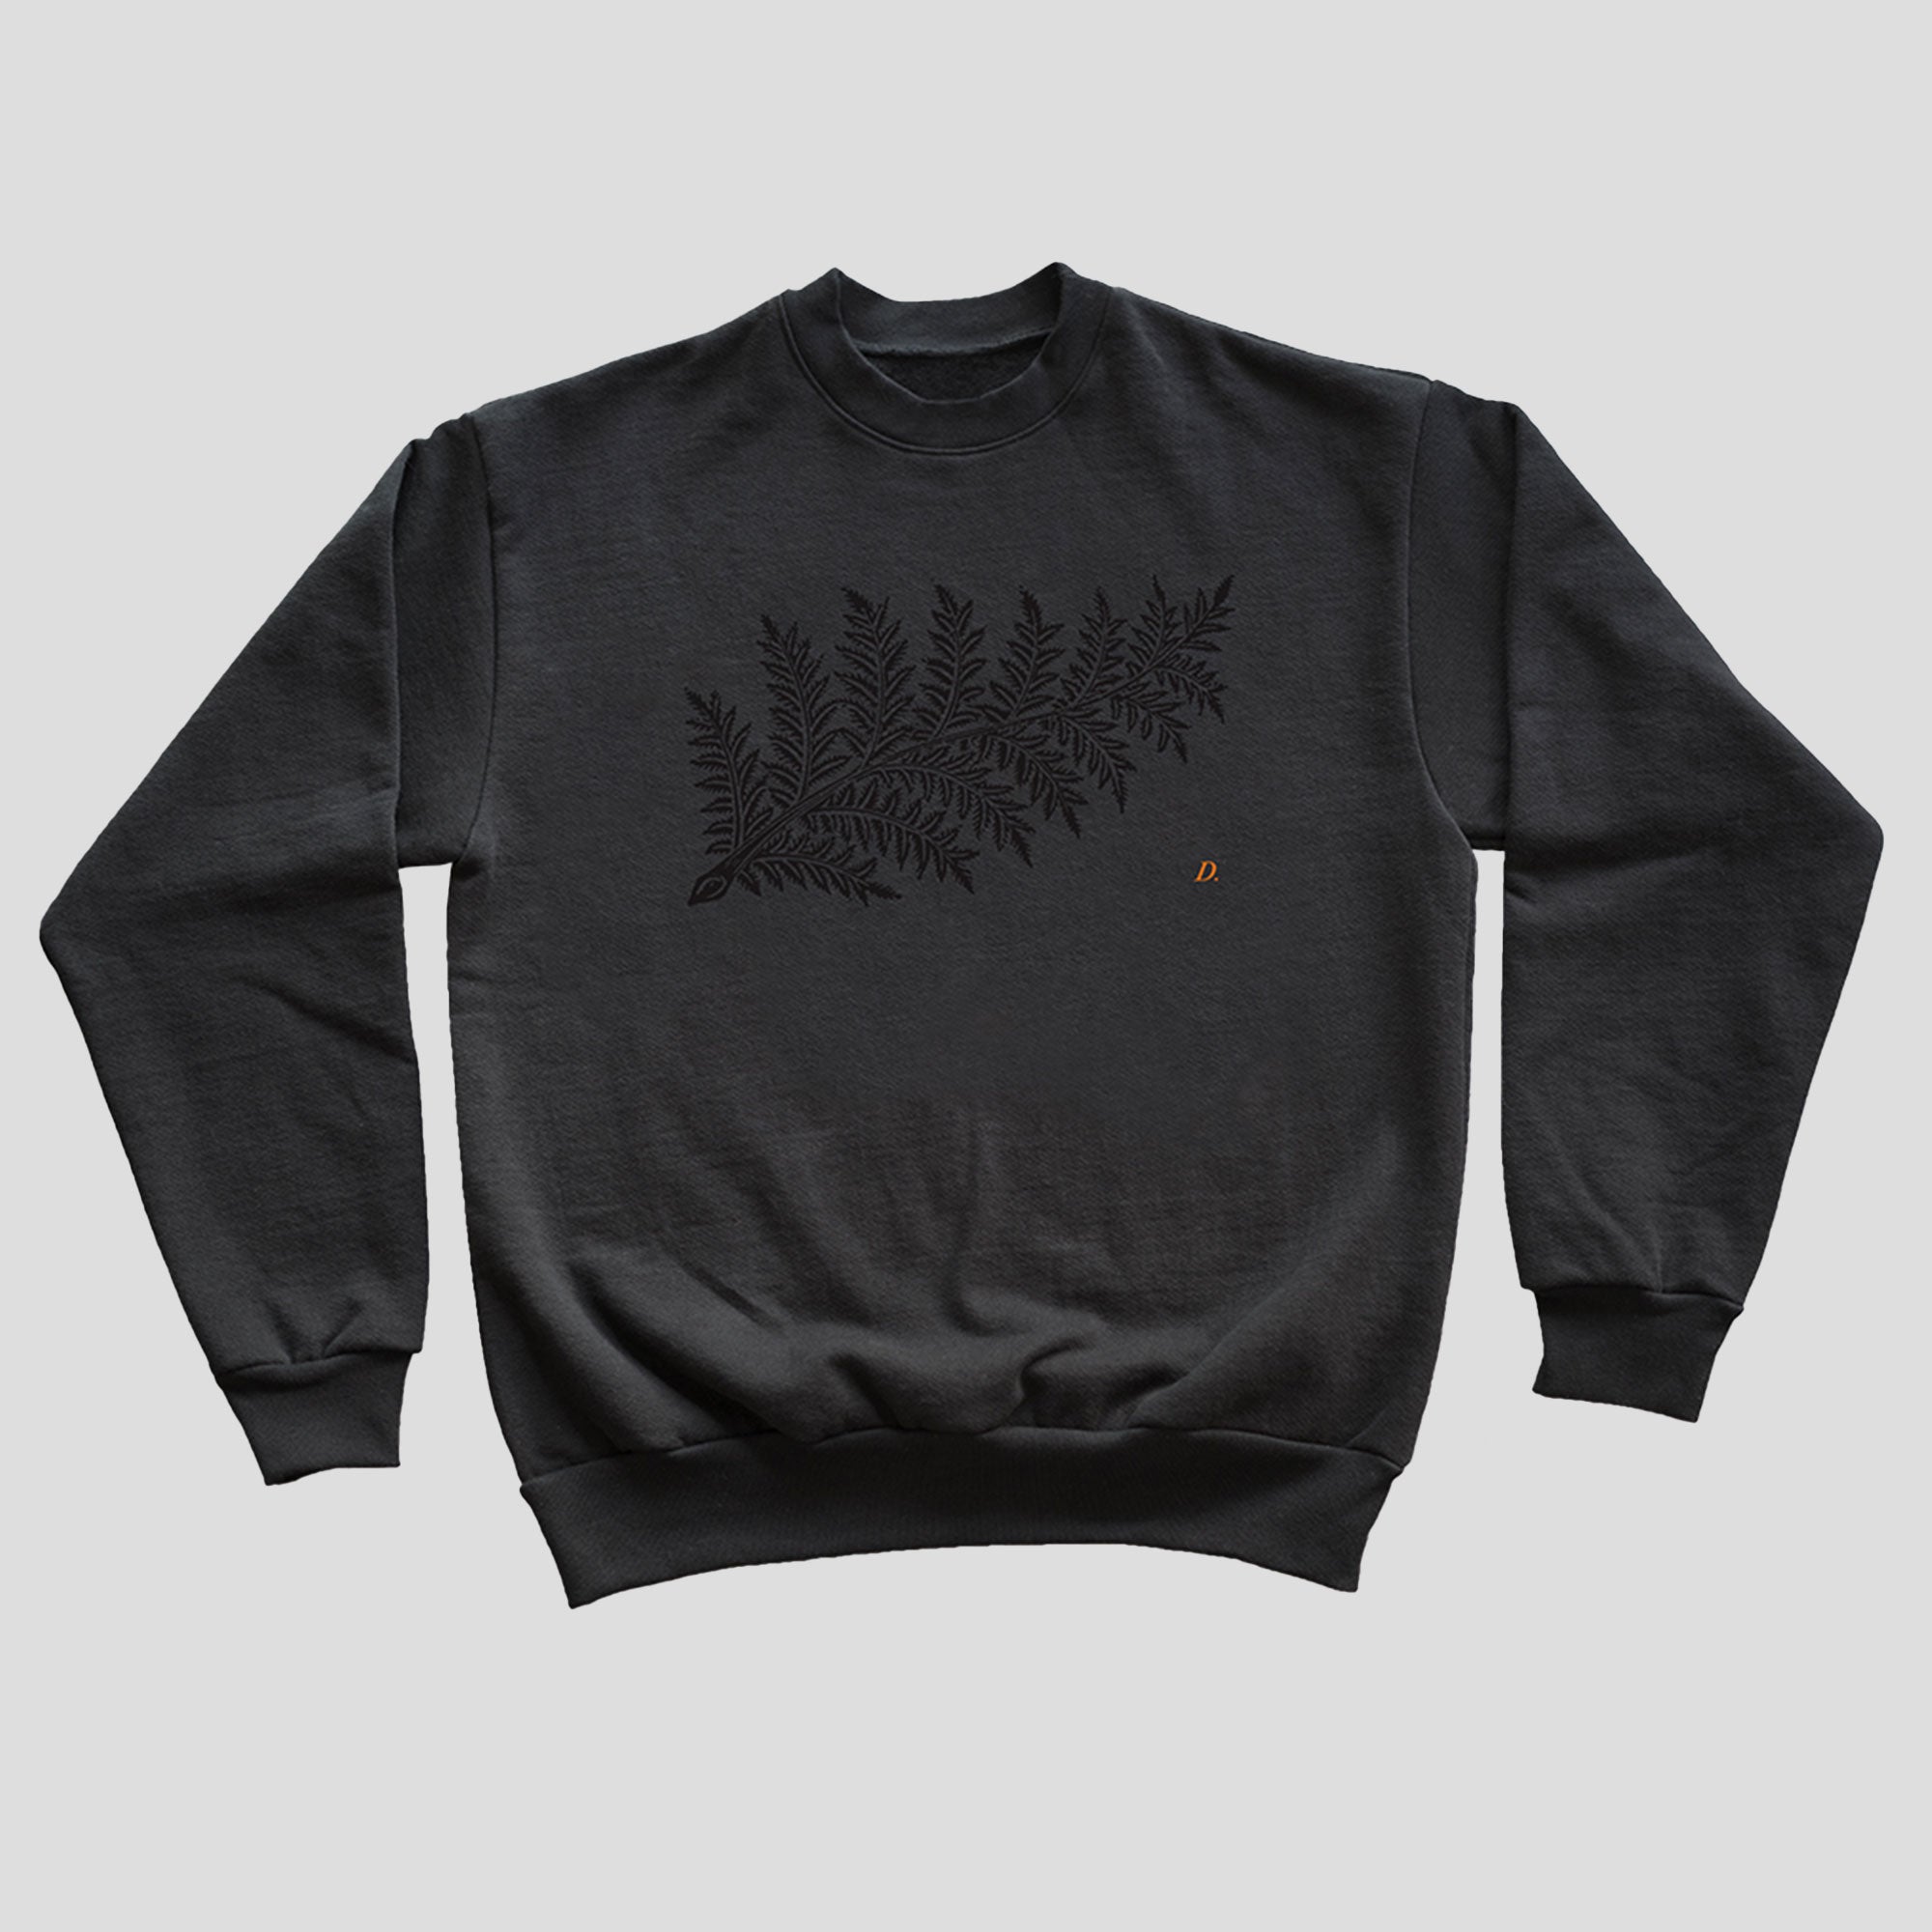 DAYLIGHT "FROND" SWEATER FADED BLACK